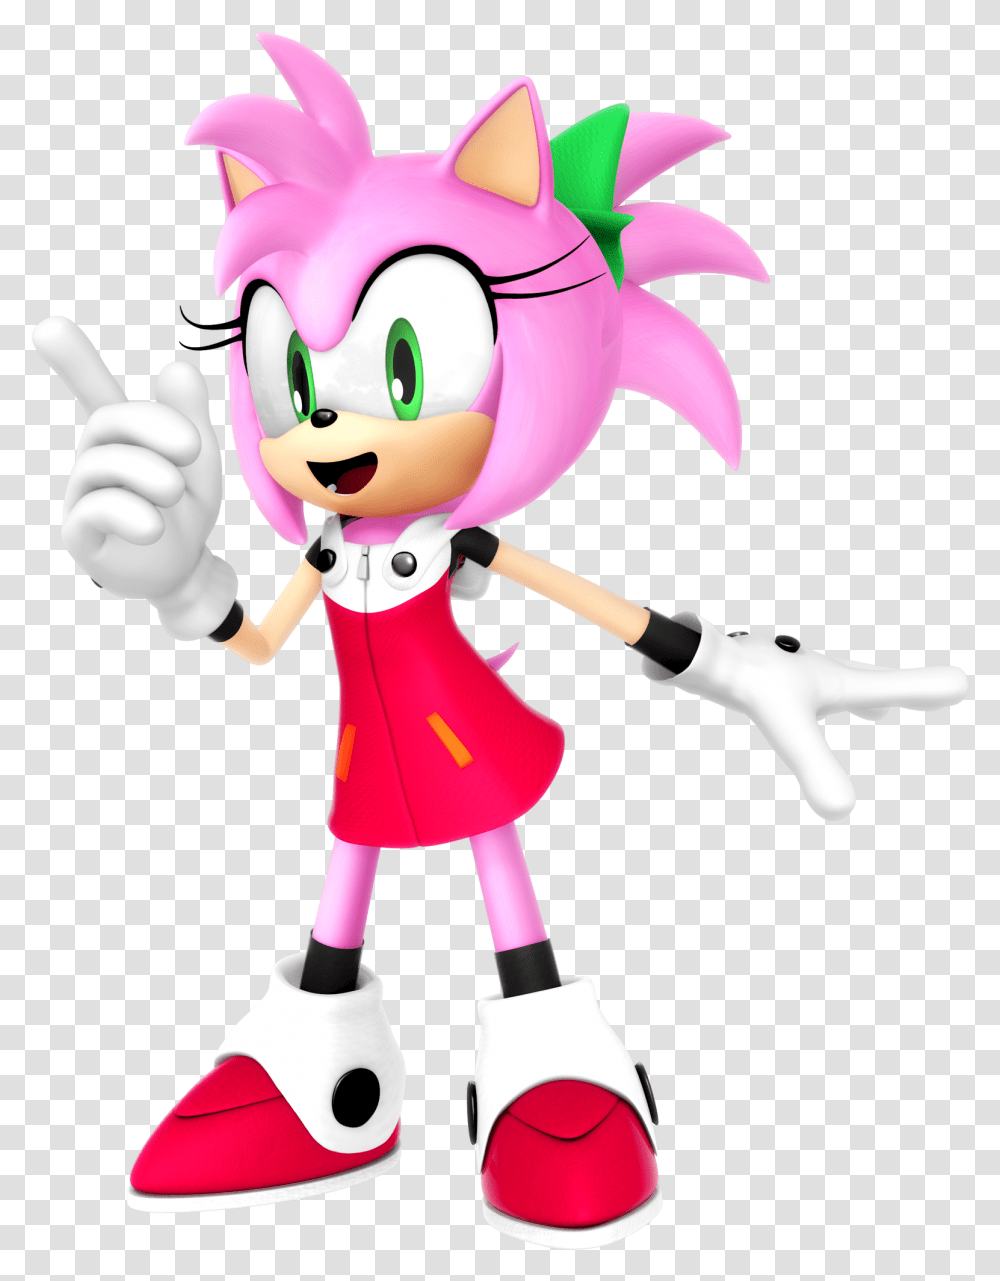 Amy Rose In Rollquots Mega Man 11 Outfit Amy Rose Nibroc Rock, Toy, Figurine Transparent Png